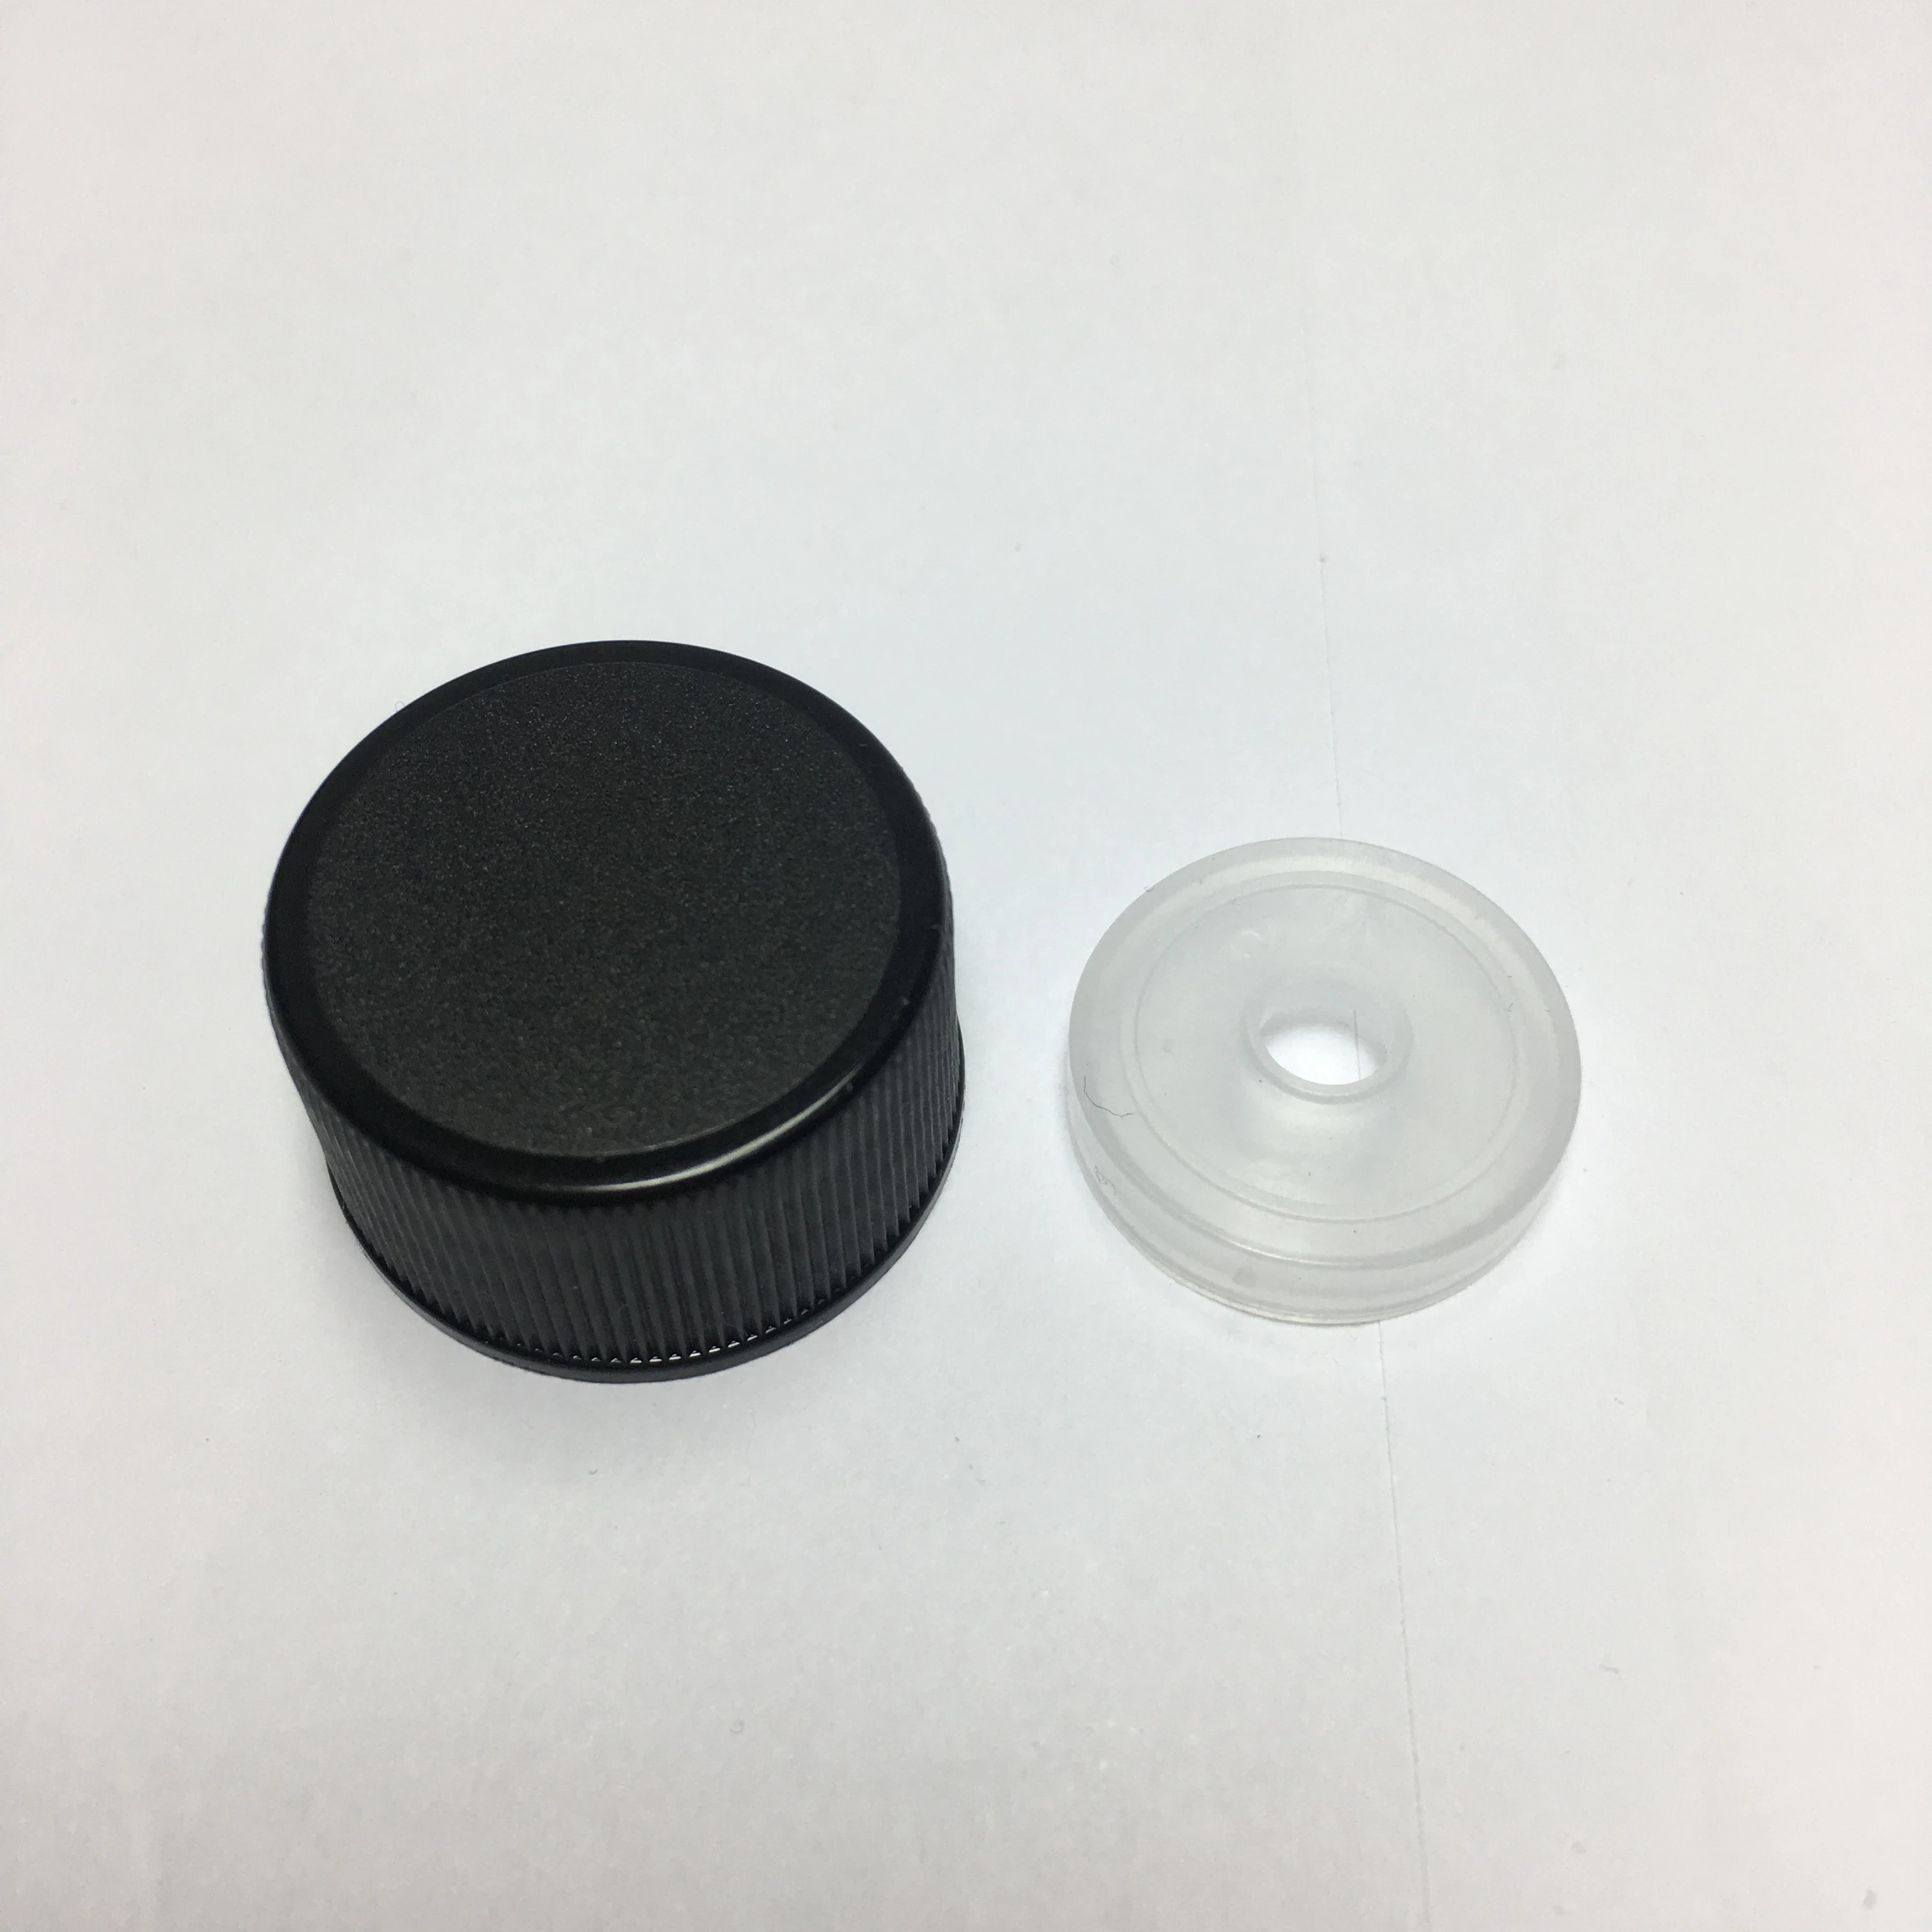 24-414 Black PP Lid, Plastic Cap with F217 Liner,5oz 150ml clear glass empty woozy hot sauce bottle ketchup sauce glass vinegar